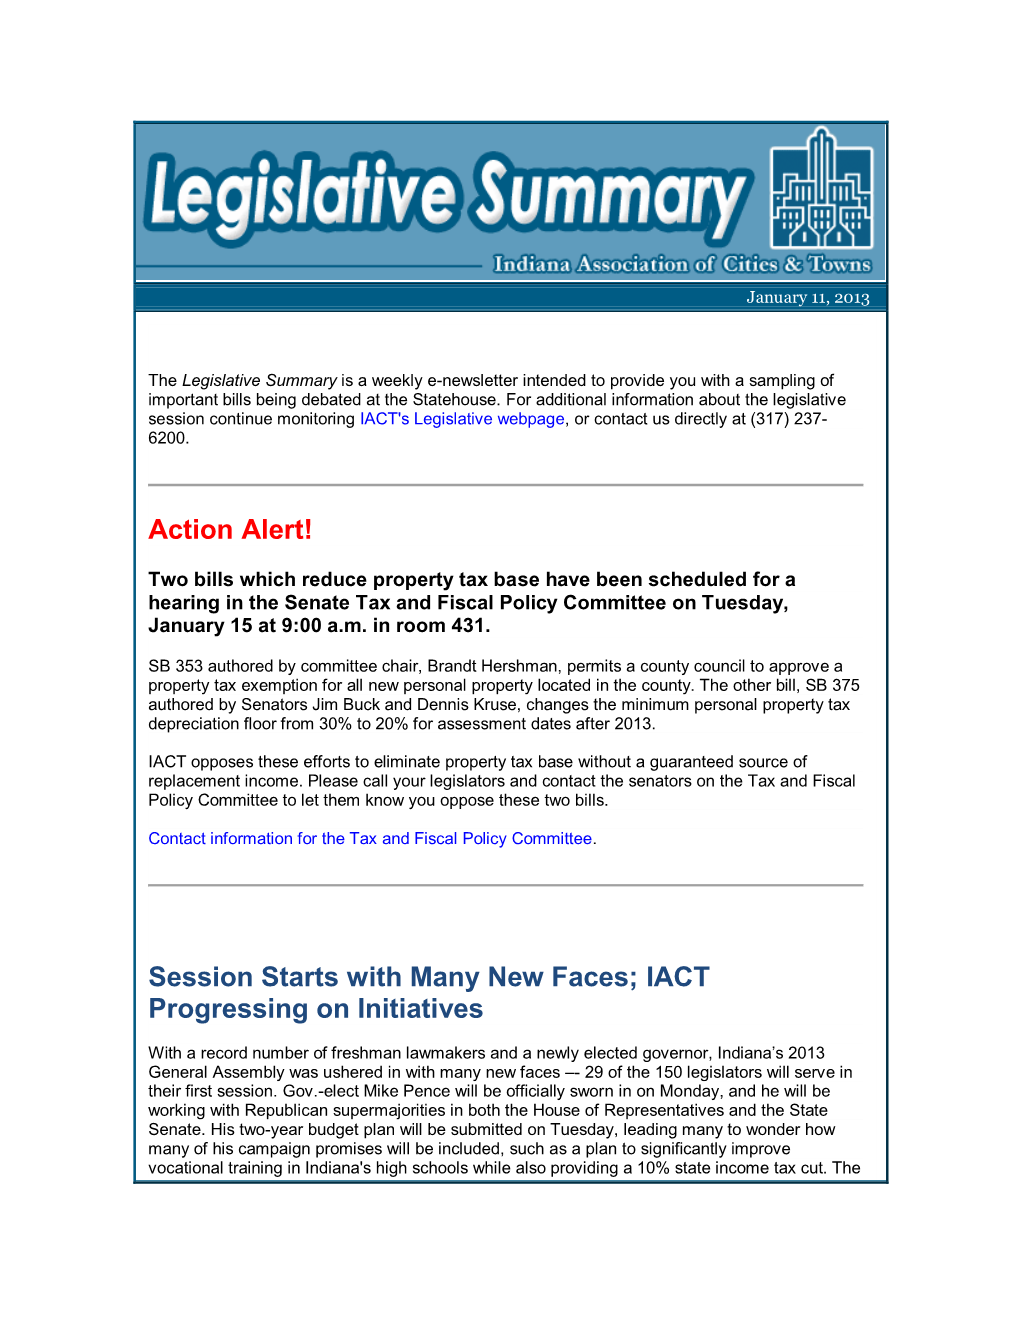 Legislative Summary Is a Weekly E-Newsletter Intended to Provide You with a Sampling of Important Bills Being Debated at the Statehouse